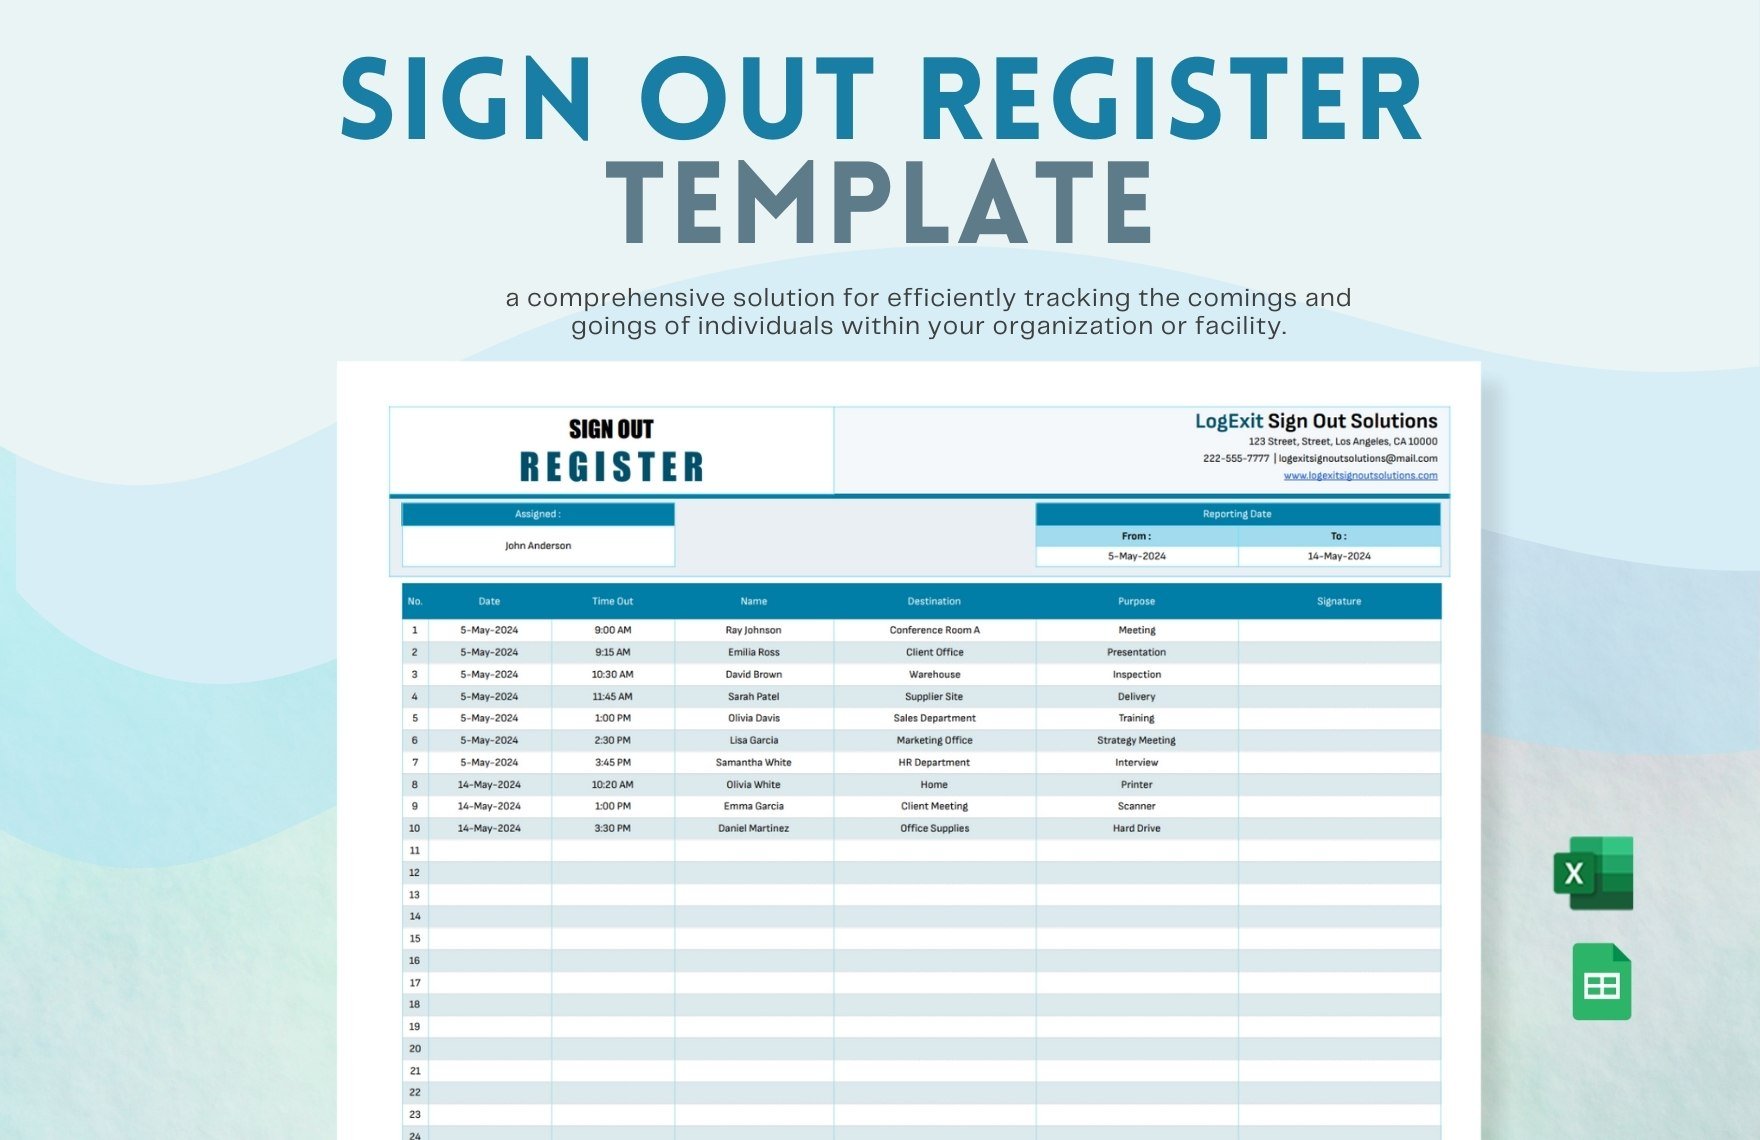 Sign Out Register Template in Excel, Google Sheets